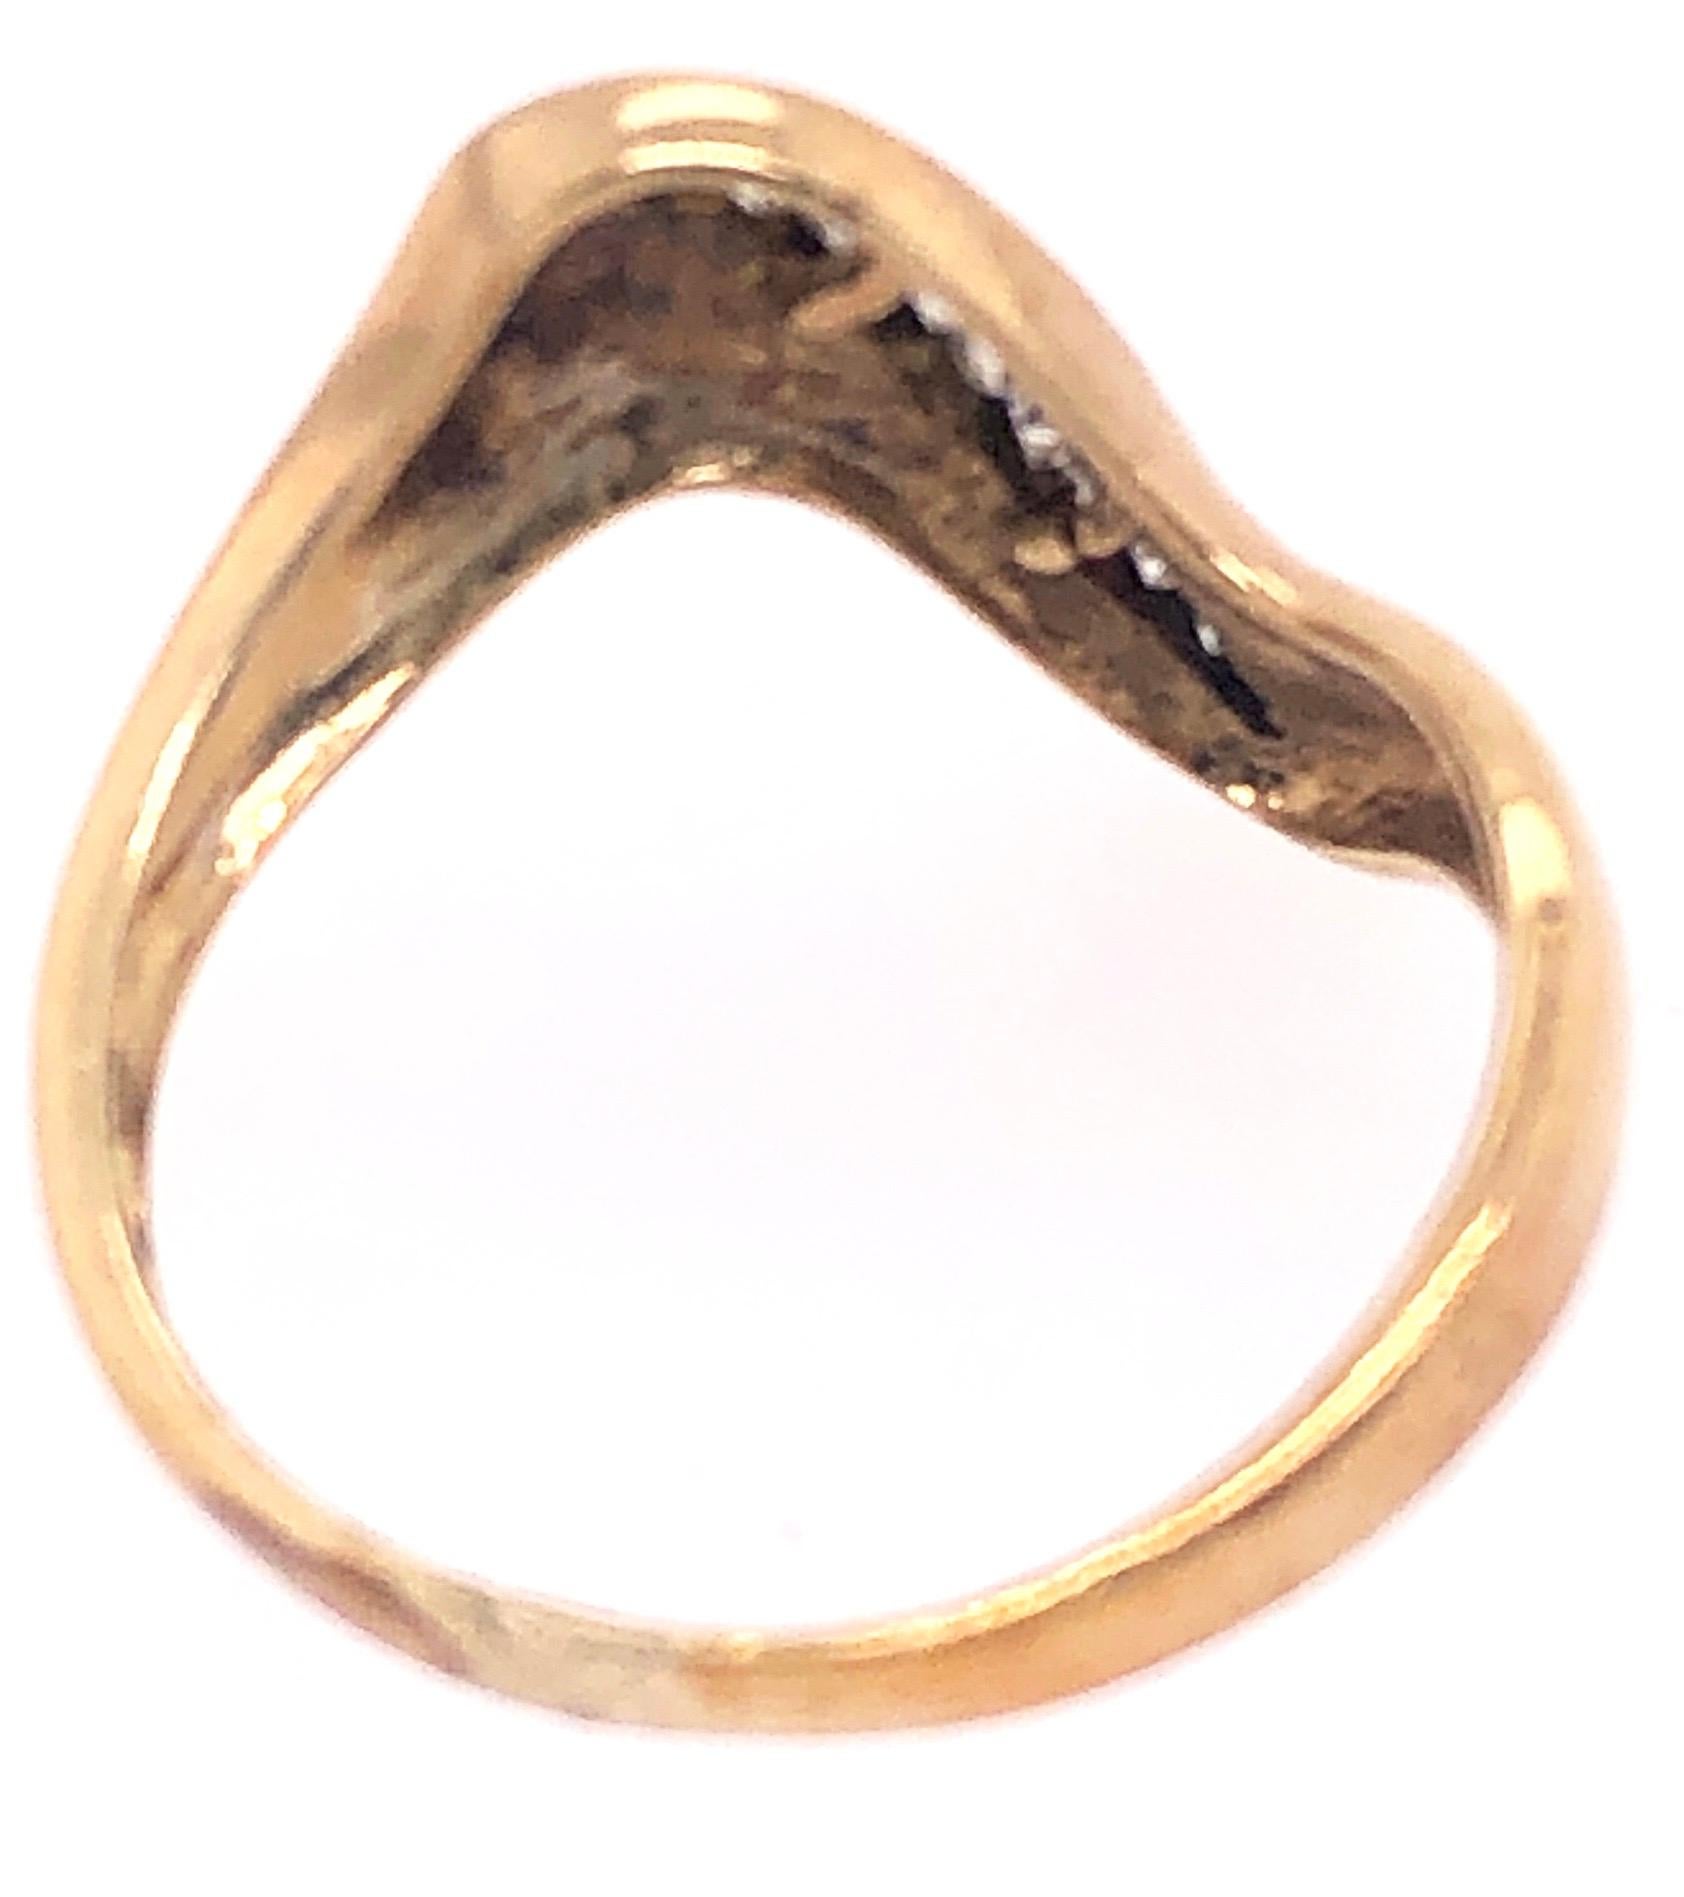 18 Karat Yellow Gold Contemporary Ring with Diamonds.
Size 6
2.50 grams total weight.